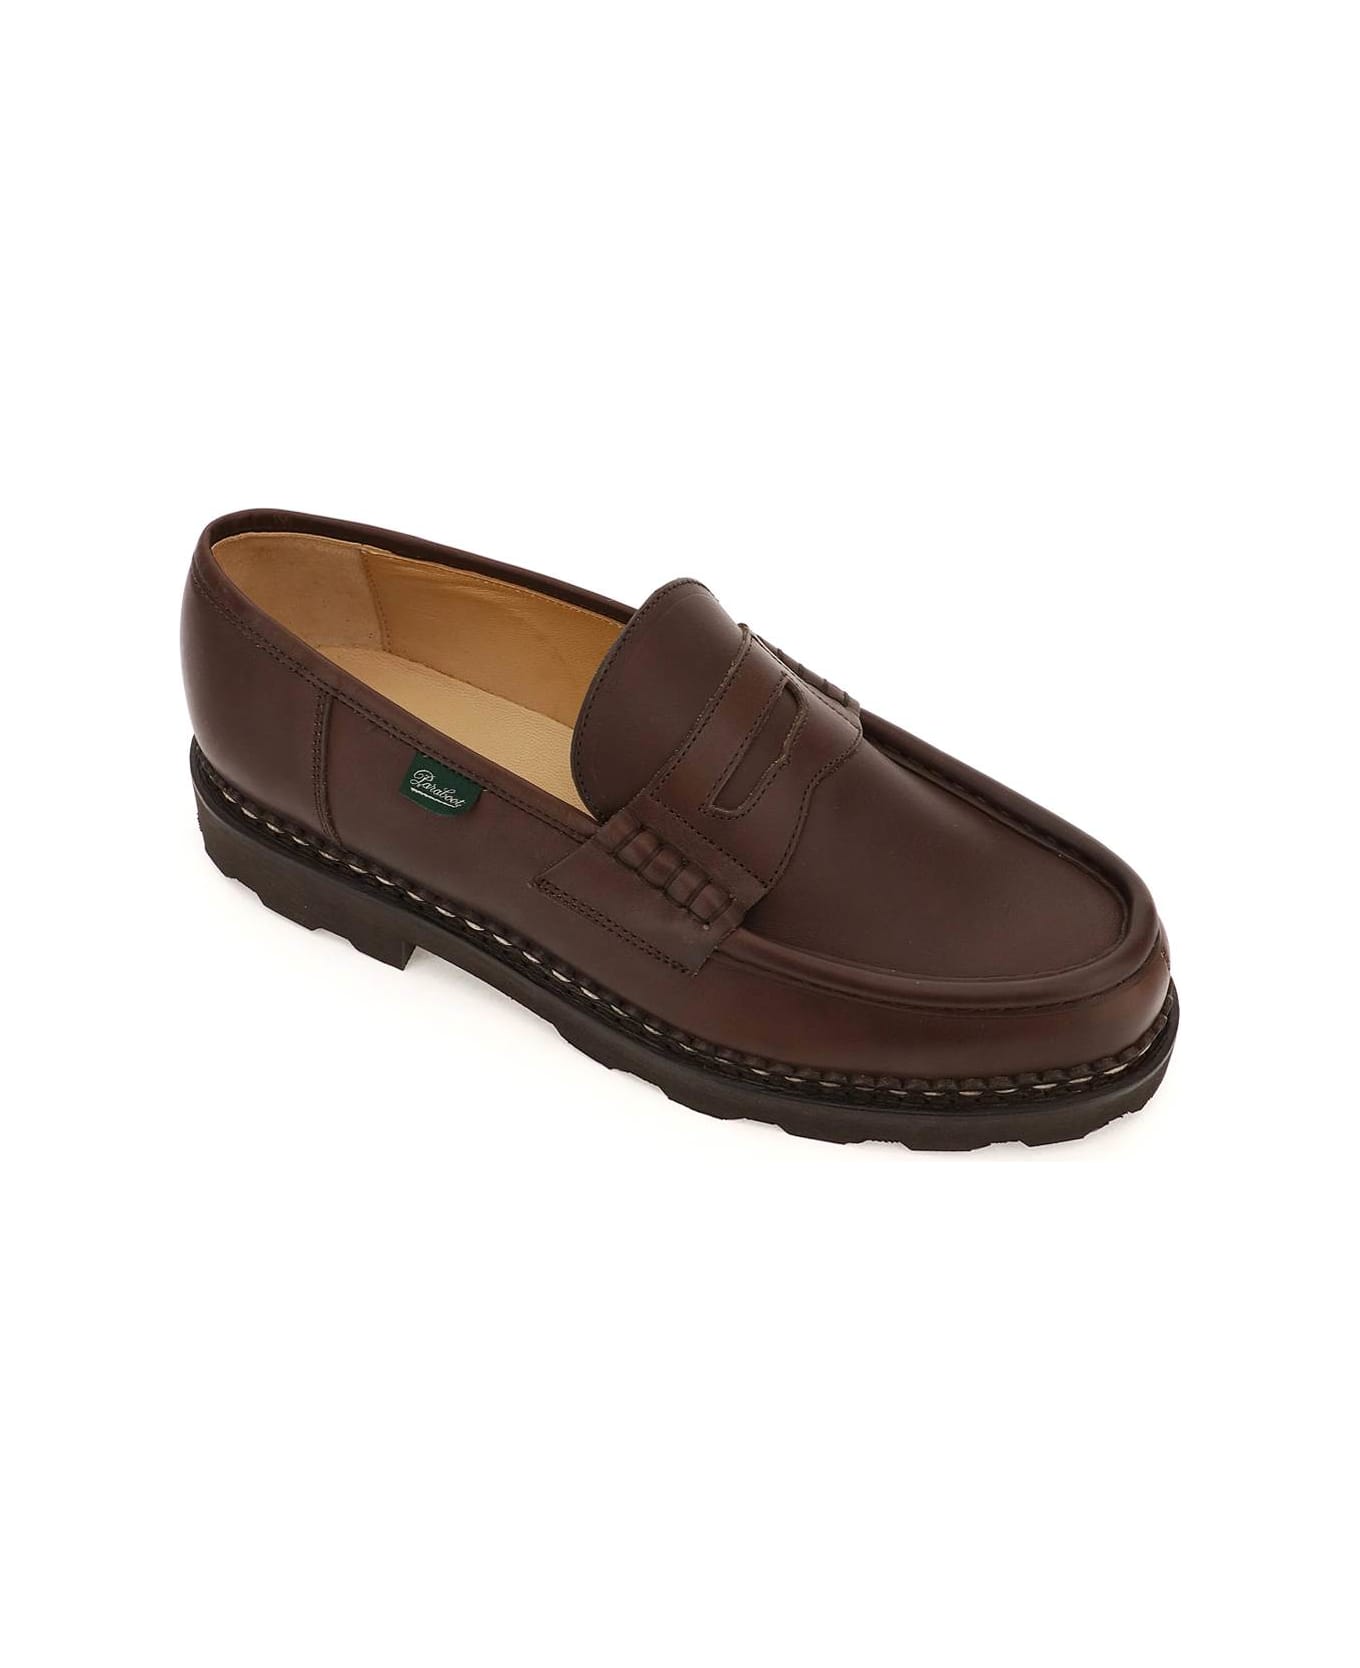 Paraboot Leather Reims Penny Loafers - Marron Lis Cafe` ローファー＆デッキシューズ